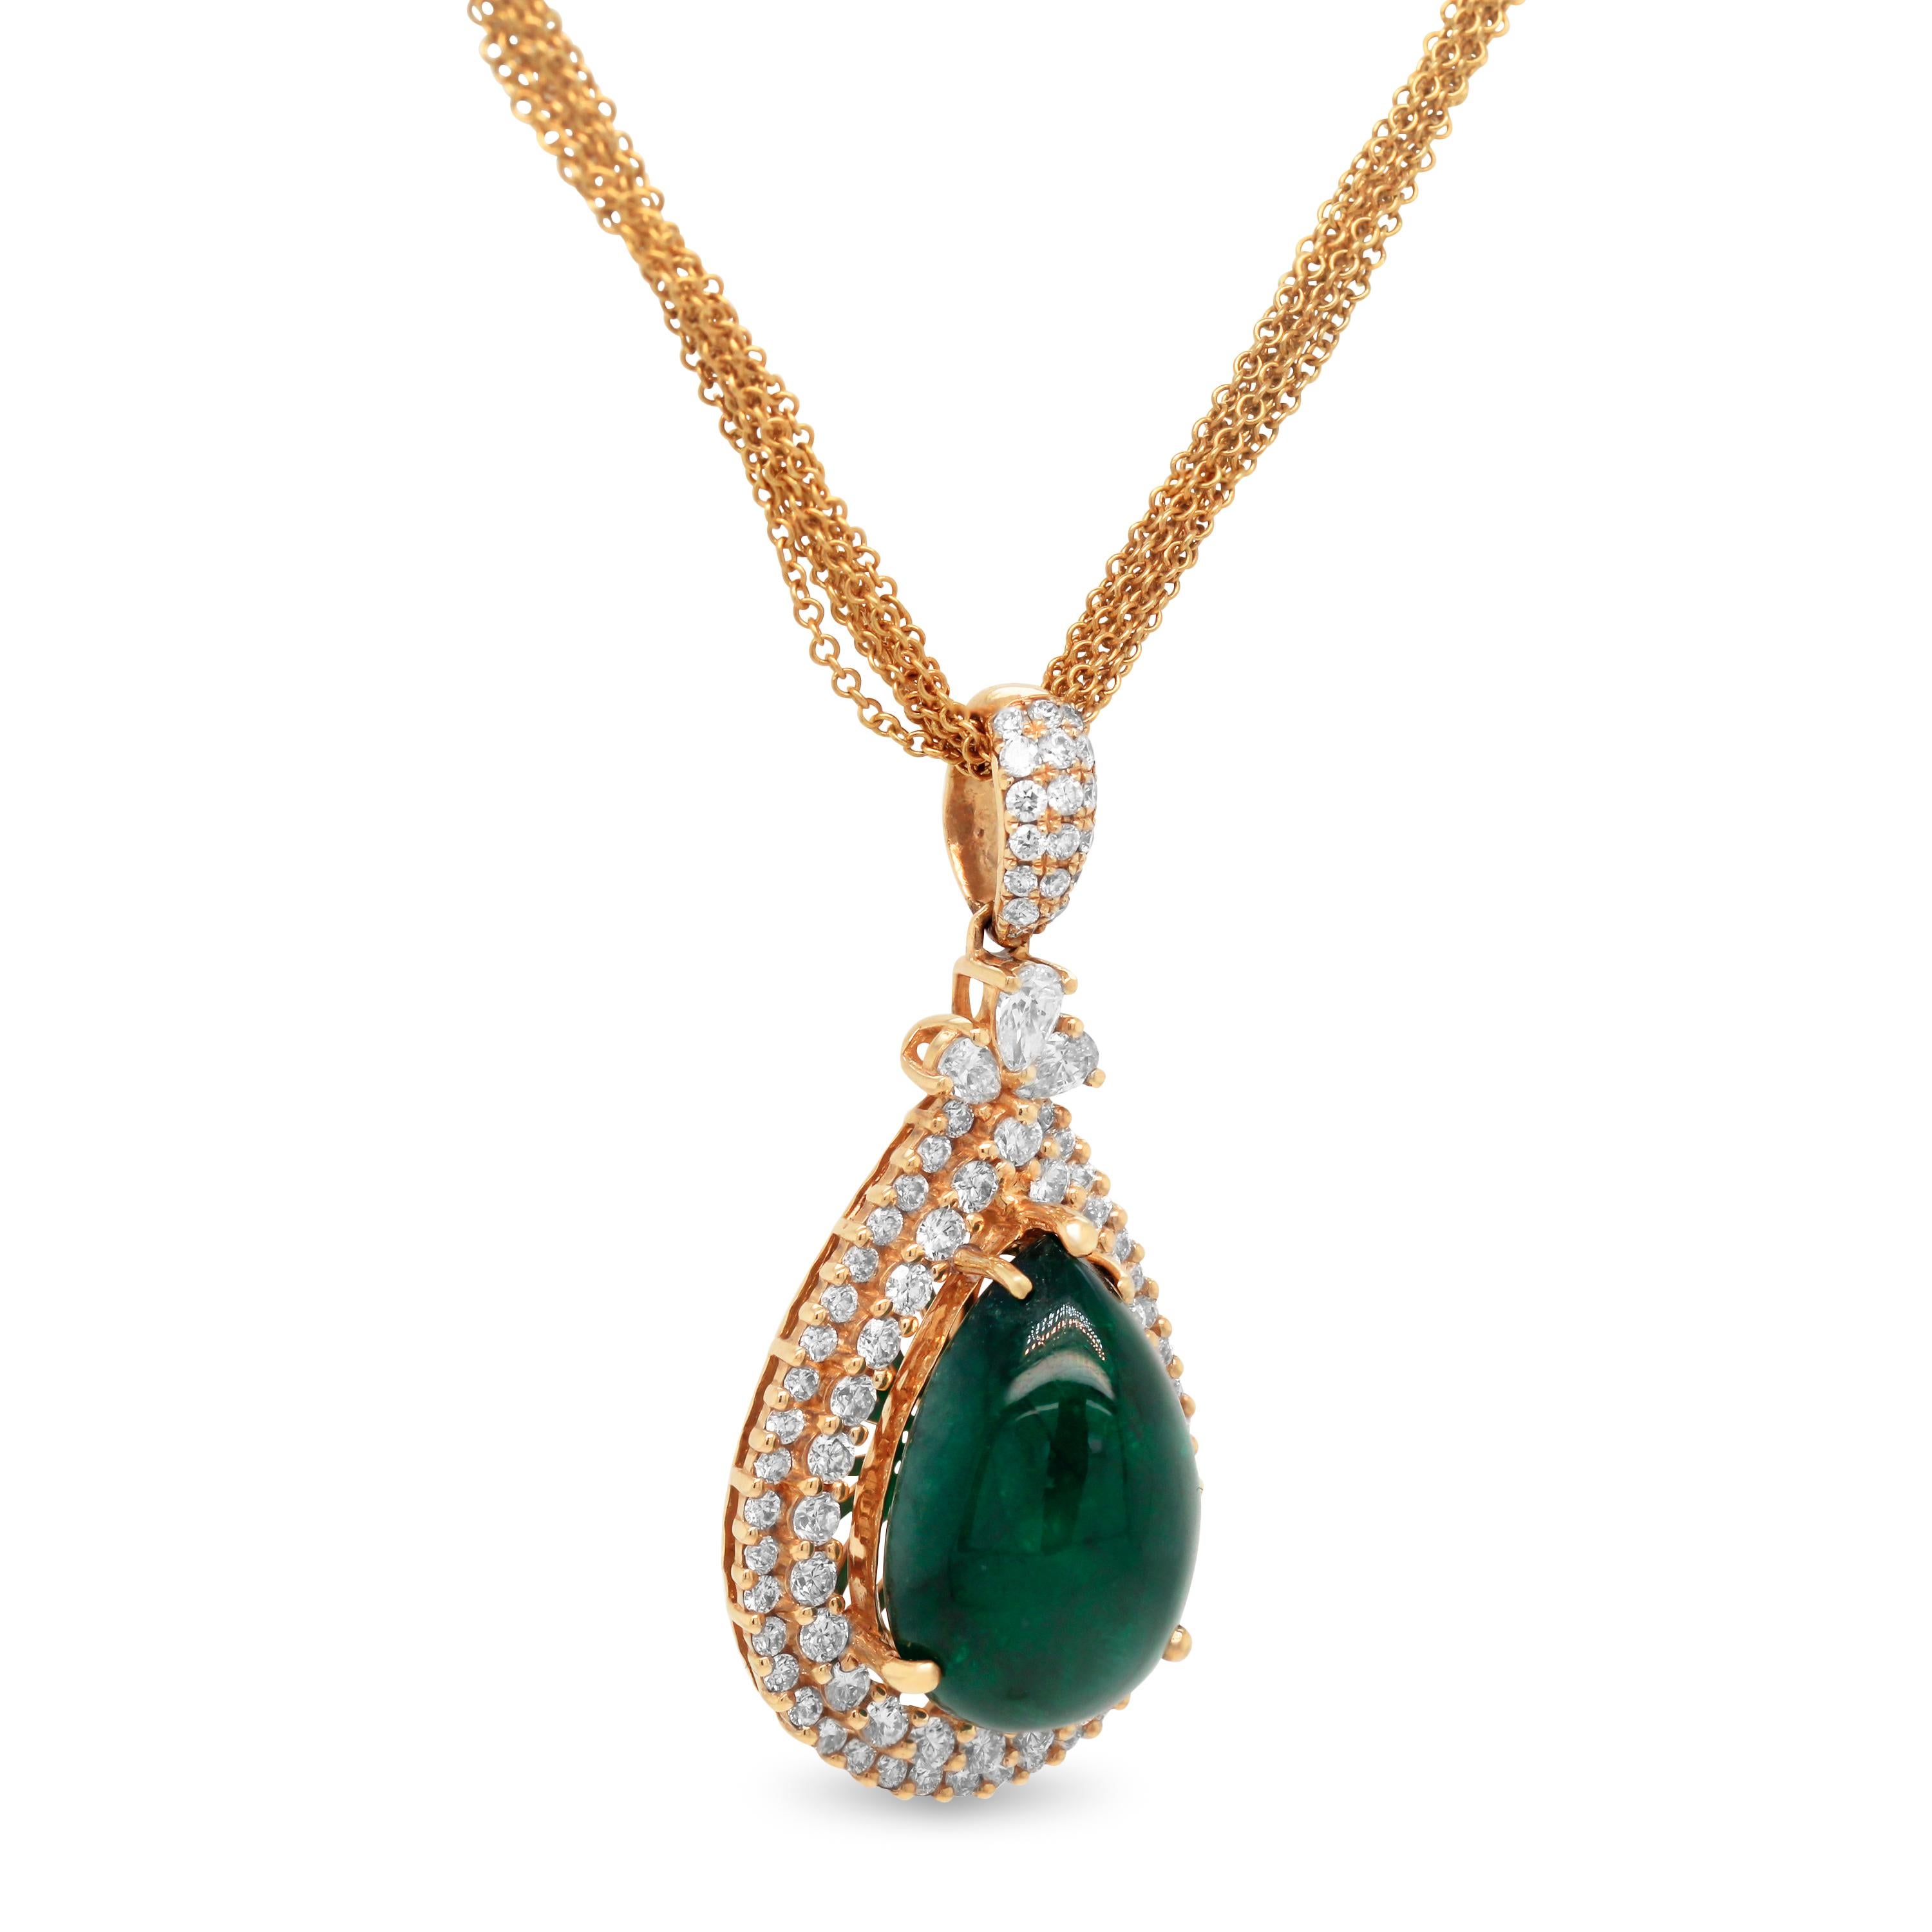 Pear Shape Cabochon Colombian Emerald 18K Yellow Gold Diamond Pendant Necklace

This beautiful pendant features a cabochon-cut, pear shape Colombian Emerald center with two rows of diamonds surrounding.

15.19 carat Emerald

2 carat apprx. G color,